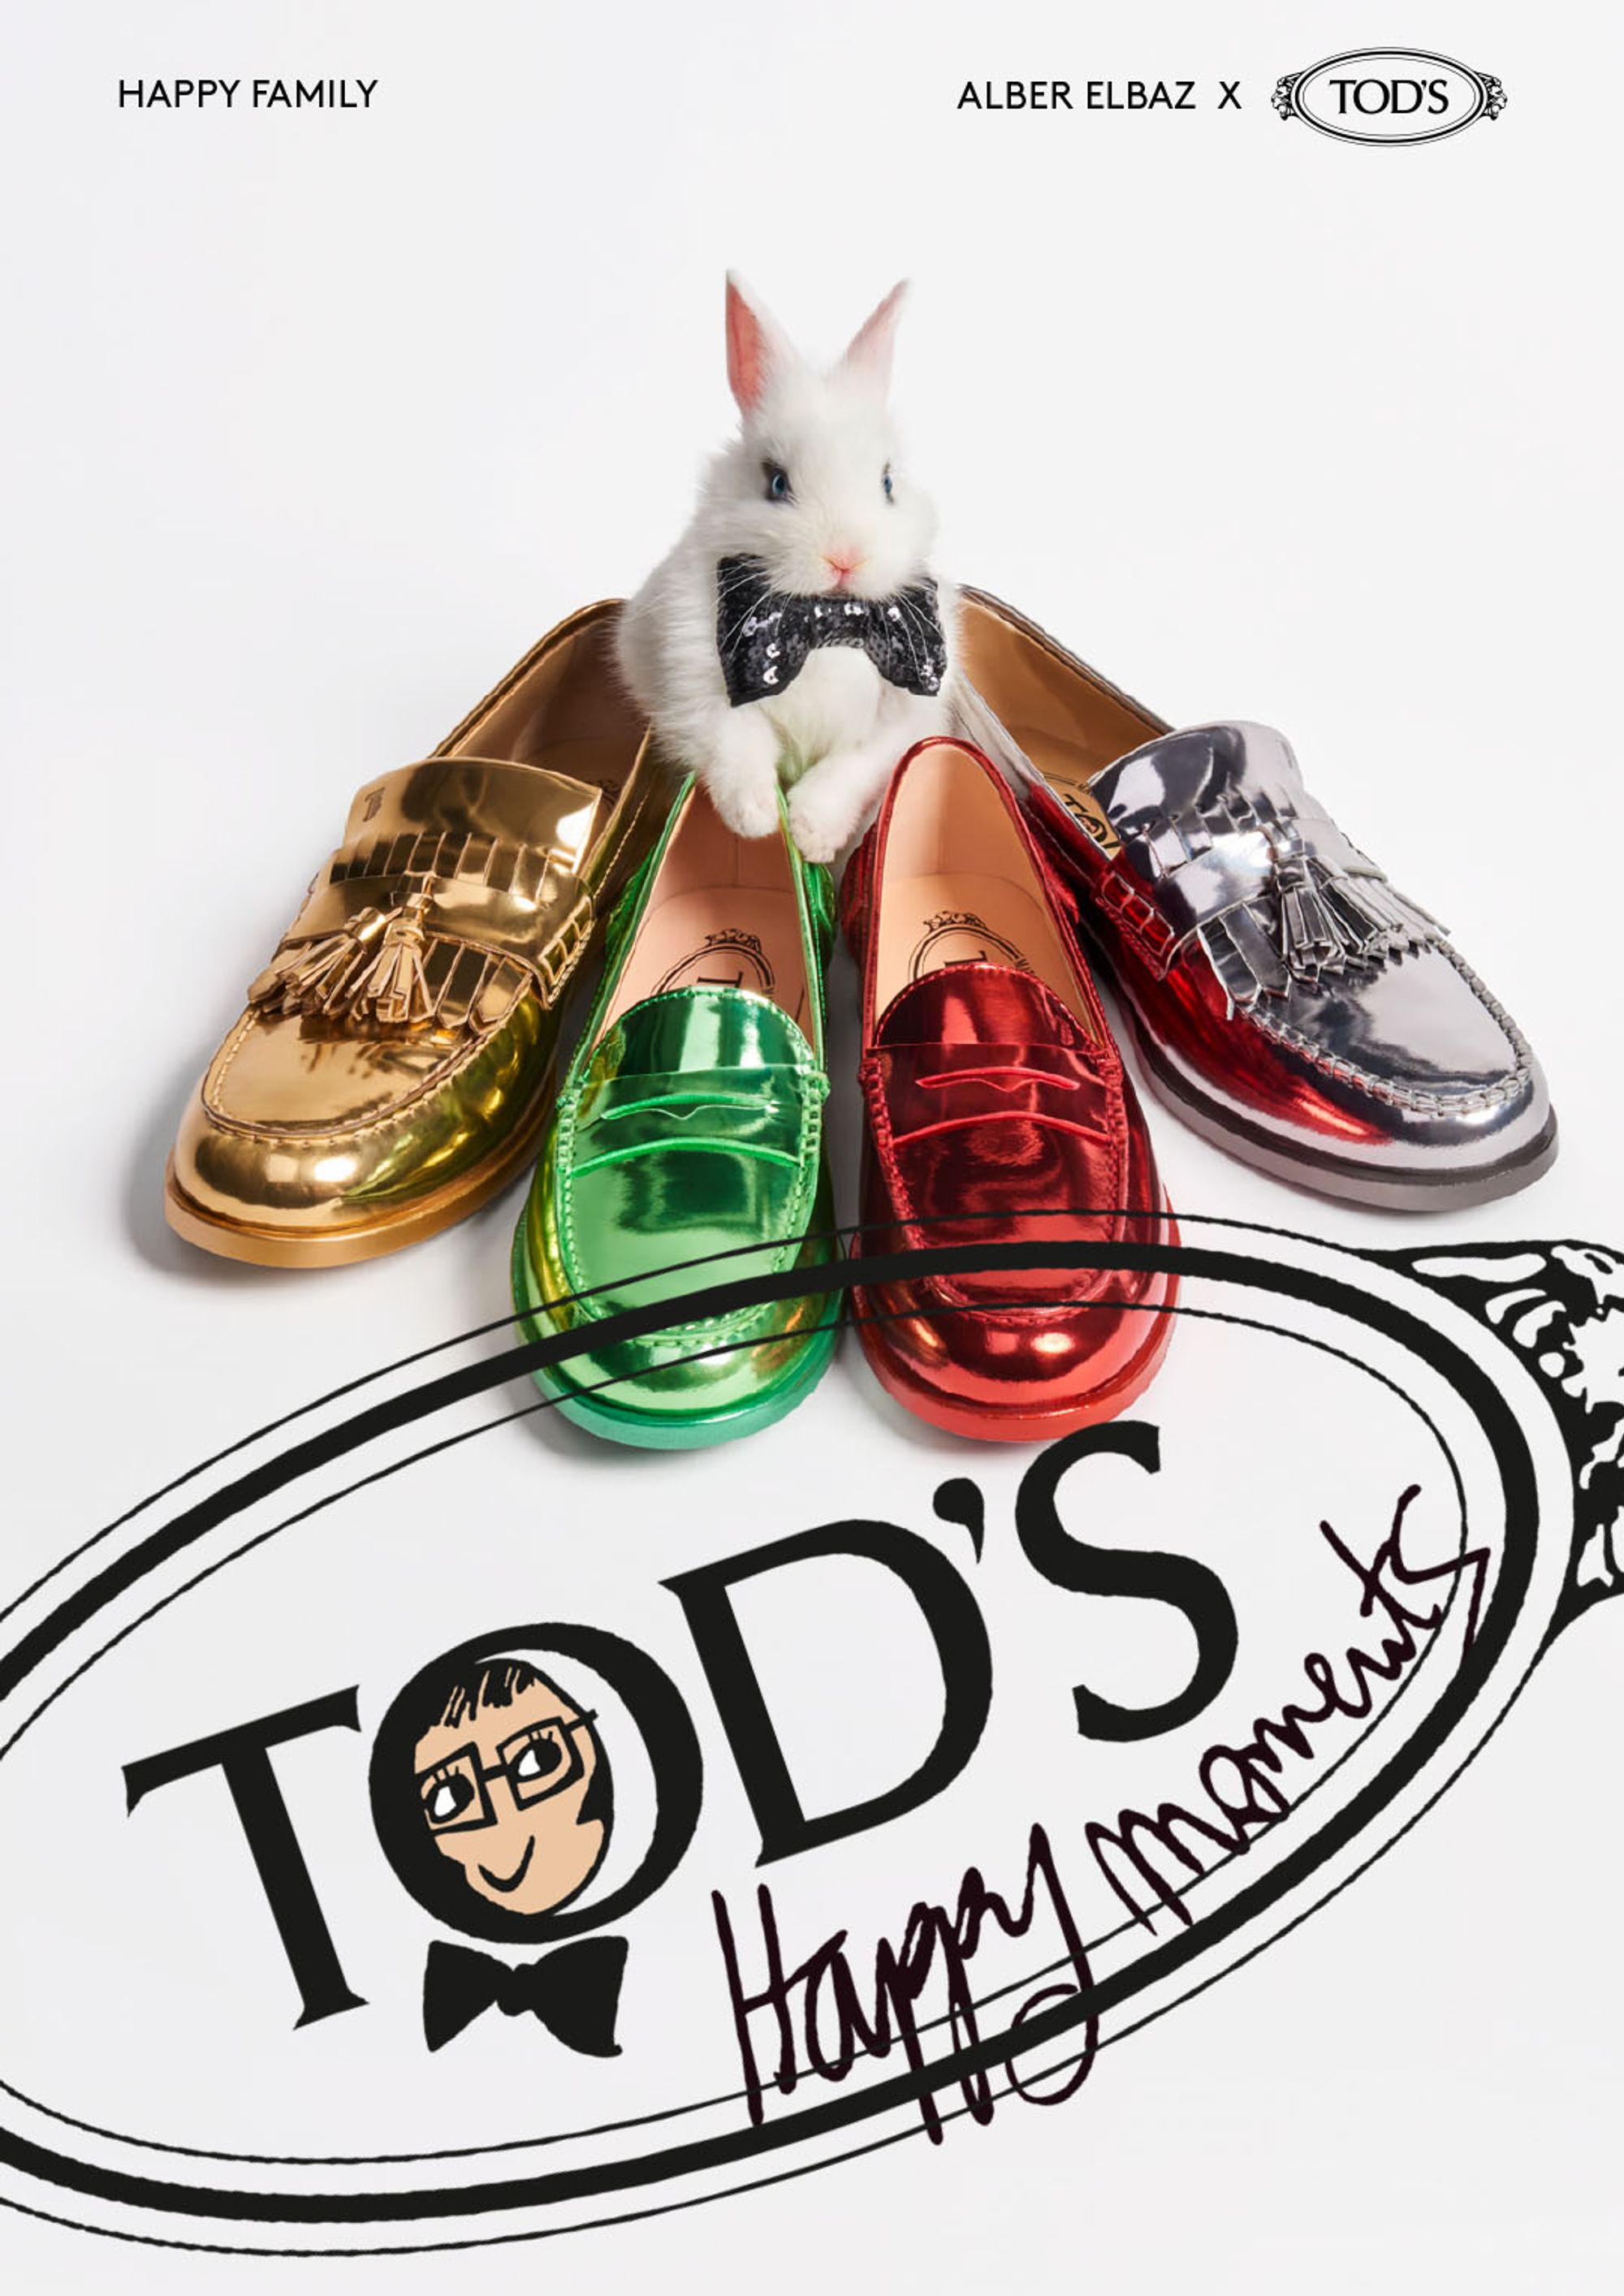 CREATIVE DIRECTION – ADVERTISING CAMPAIGN ALBER ELBAZ X TOD’S HAPPY MOMENTS